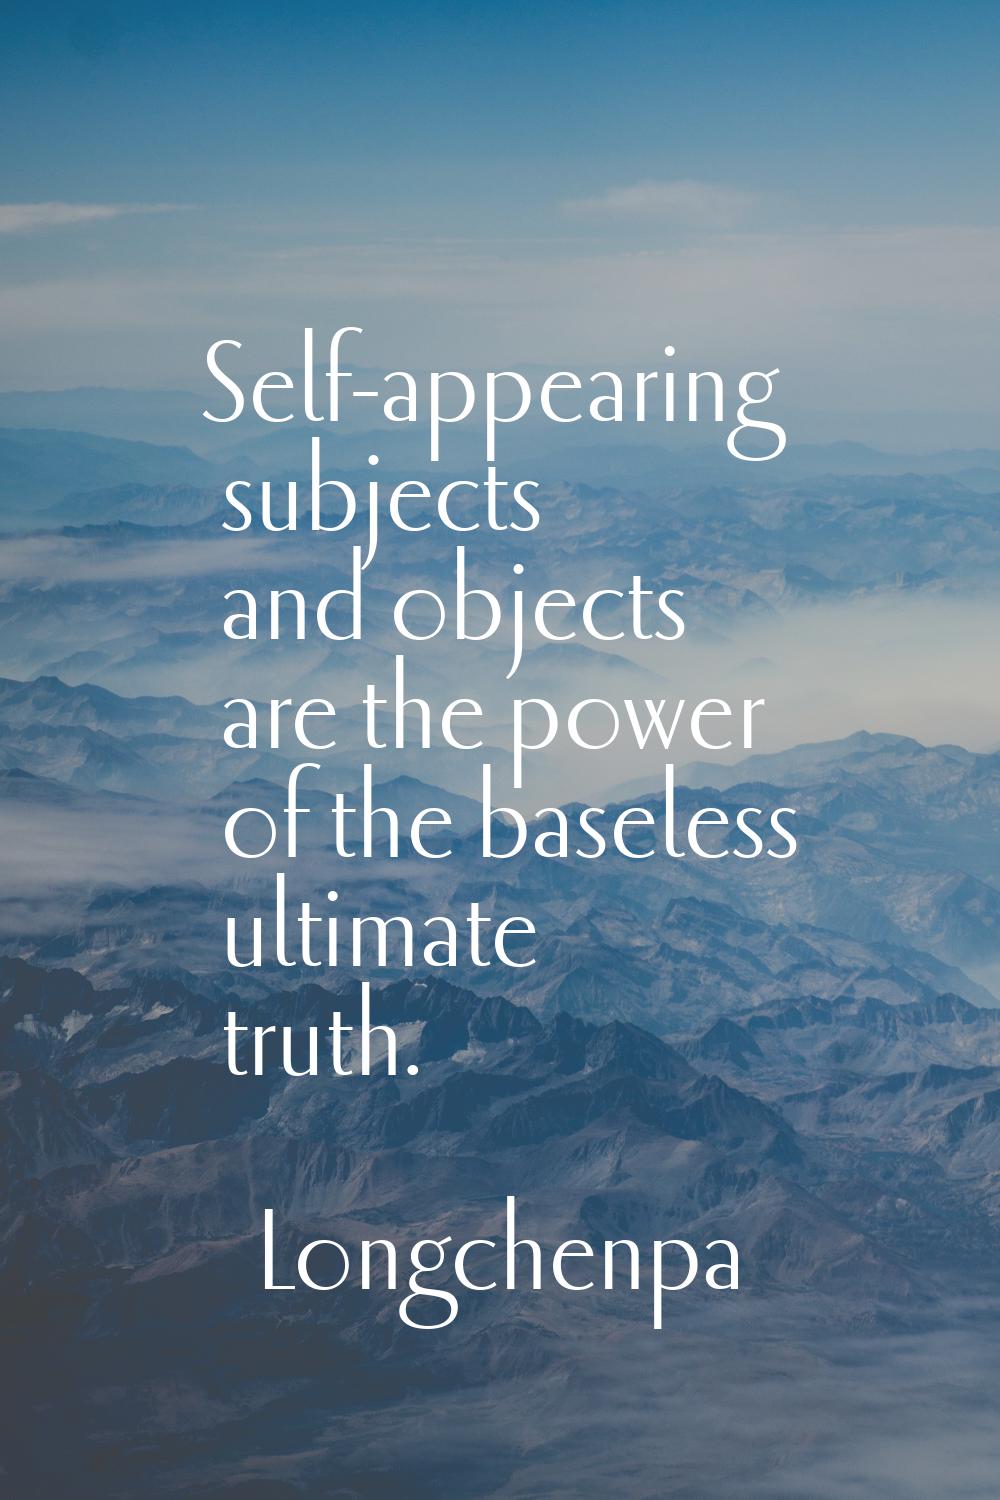 Self-appearing subjects and objects are the power of the baseless ultimate truth.